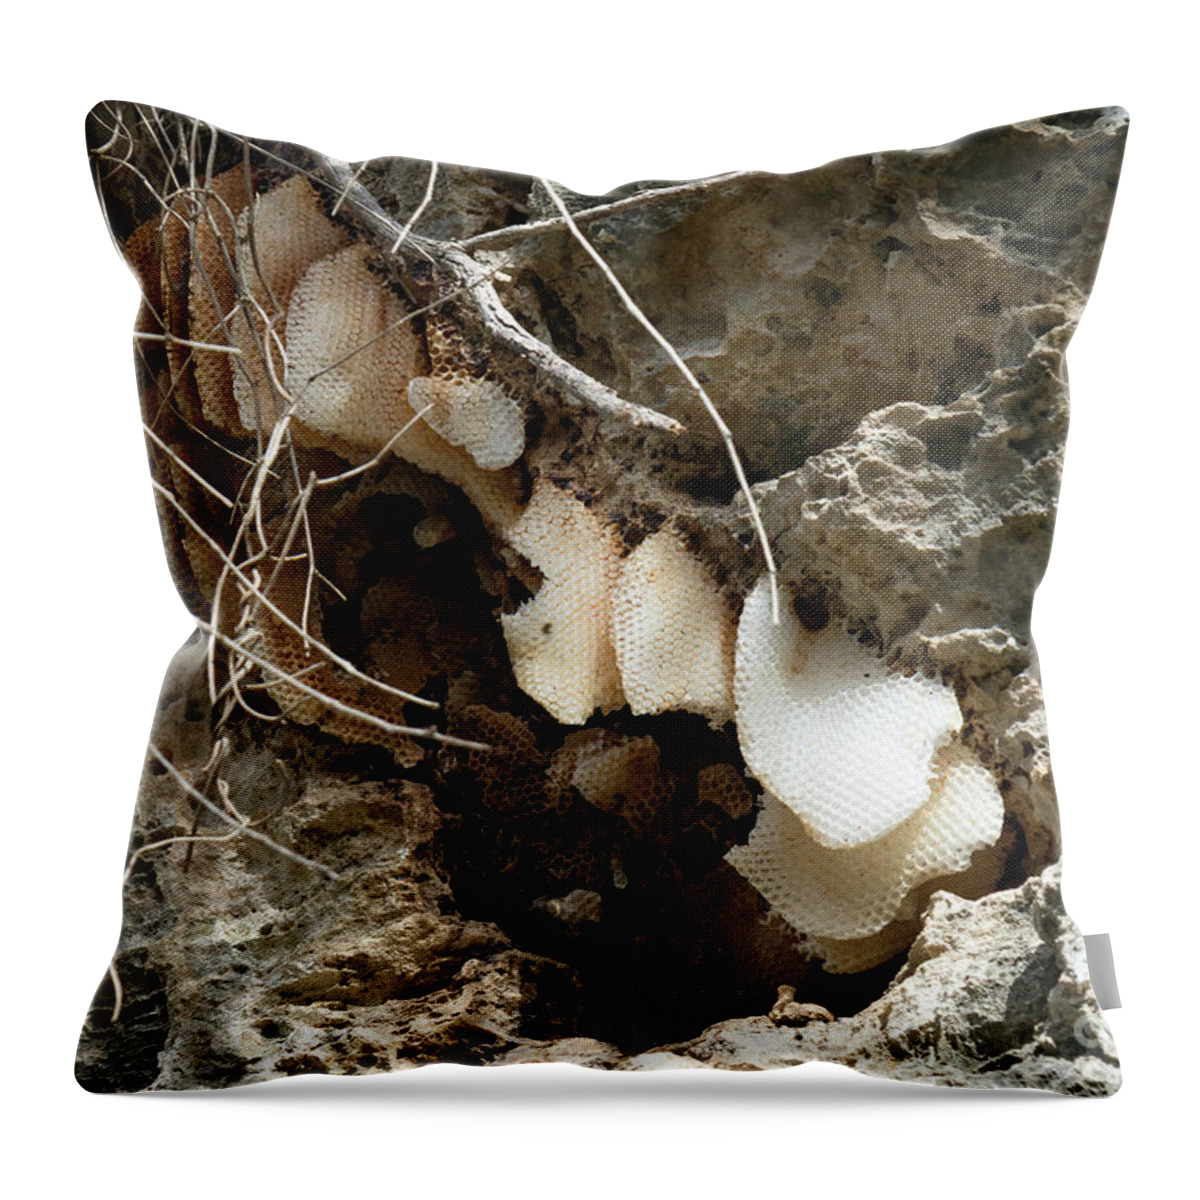 Bees Throw Pillow featuring the photograph Busy Bees by Elaine Teague